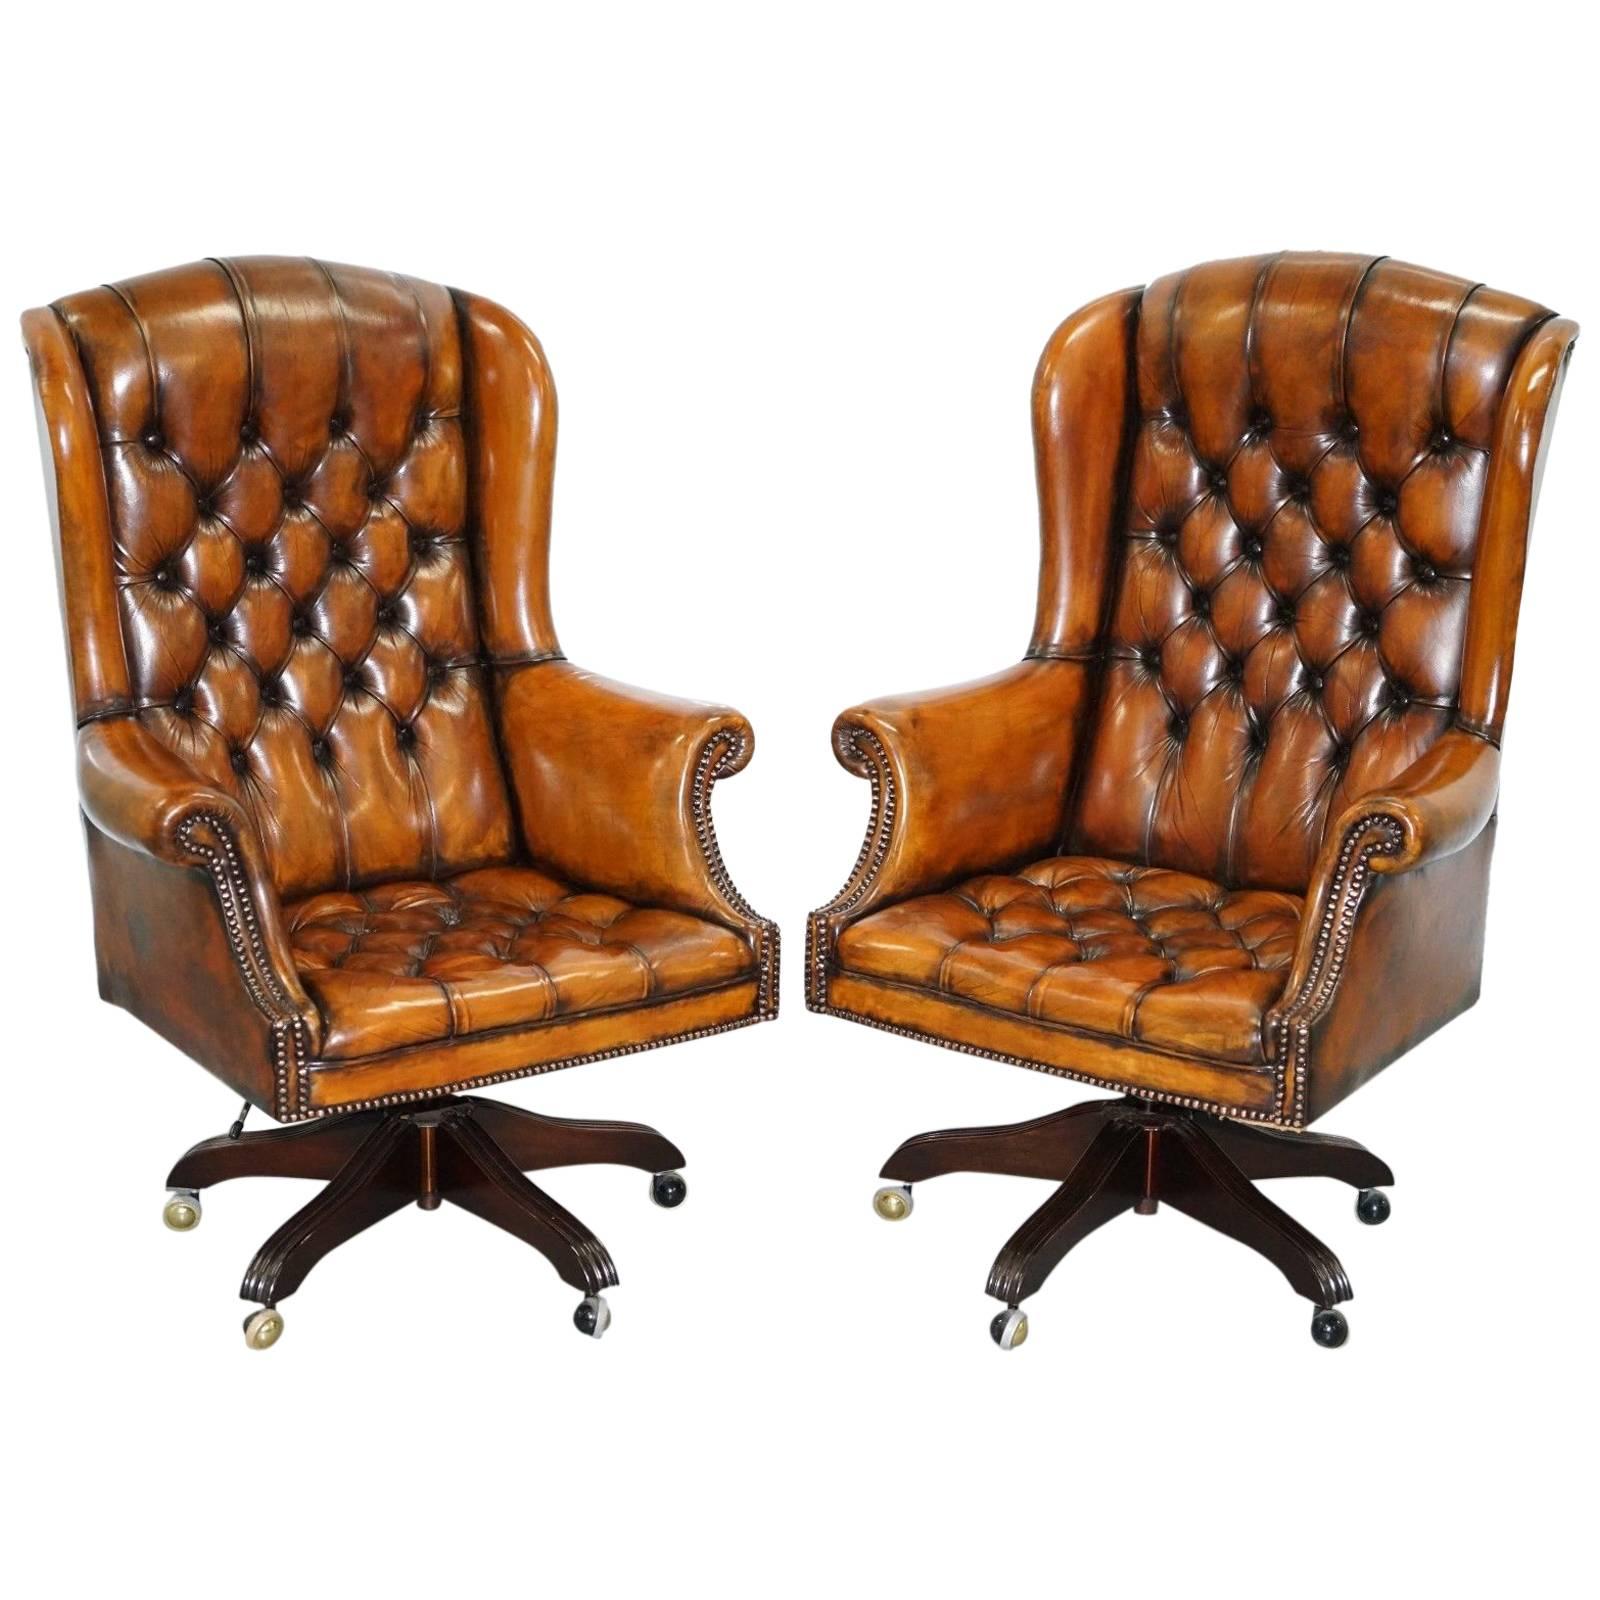 1 of 2 of Matching Chesterfield Wingback Office Chairs Hand-Dyed Brown Leather